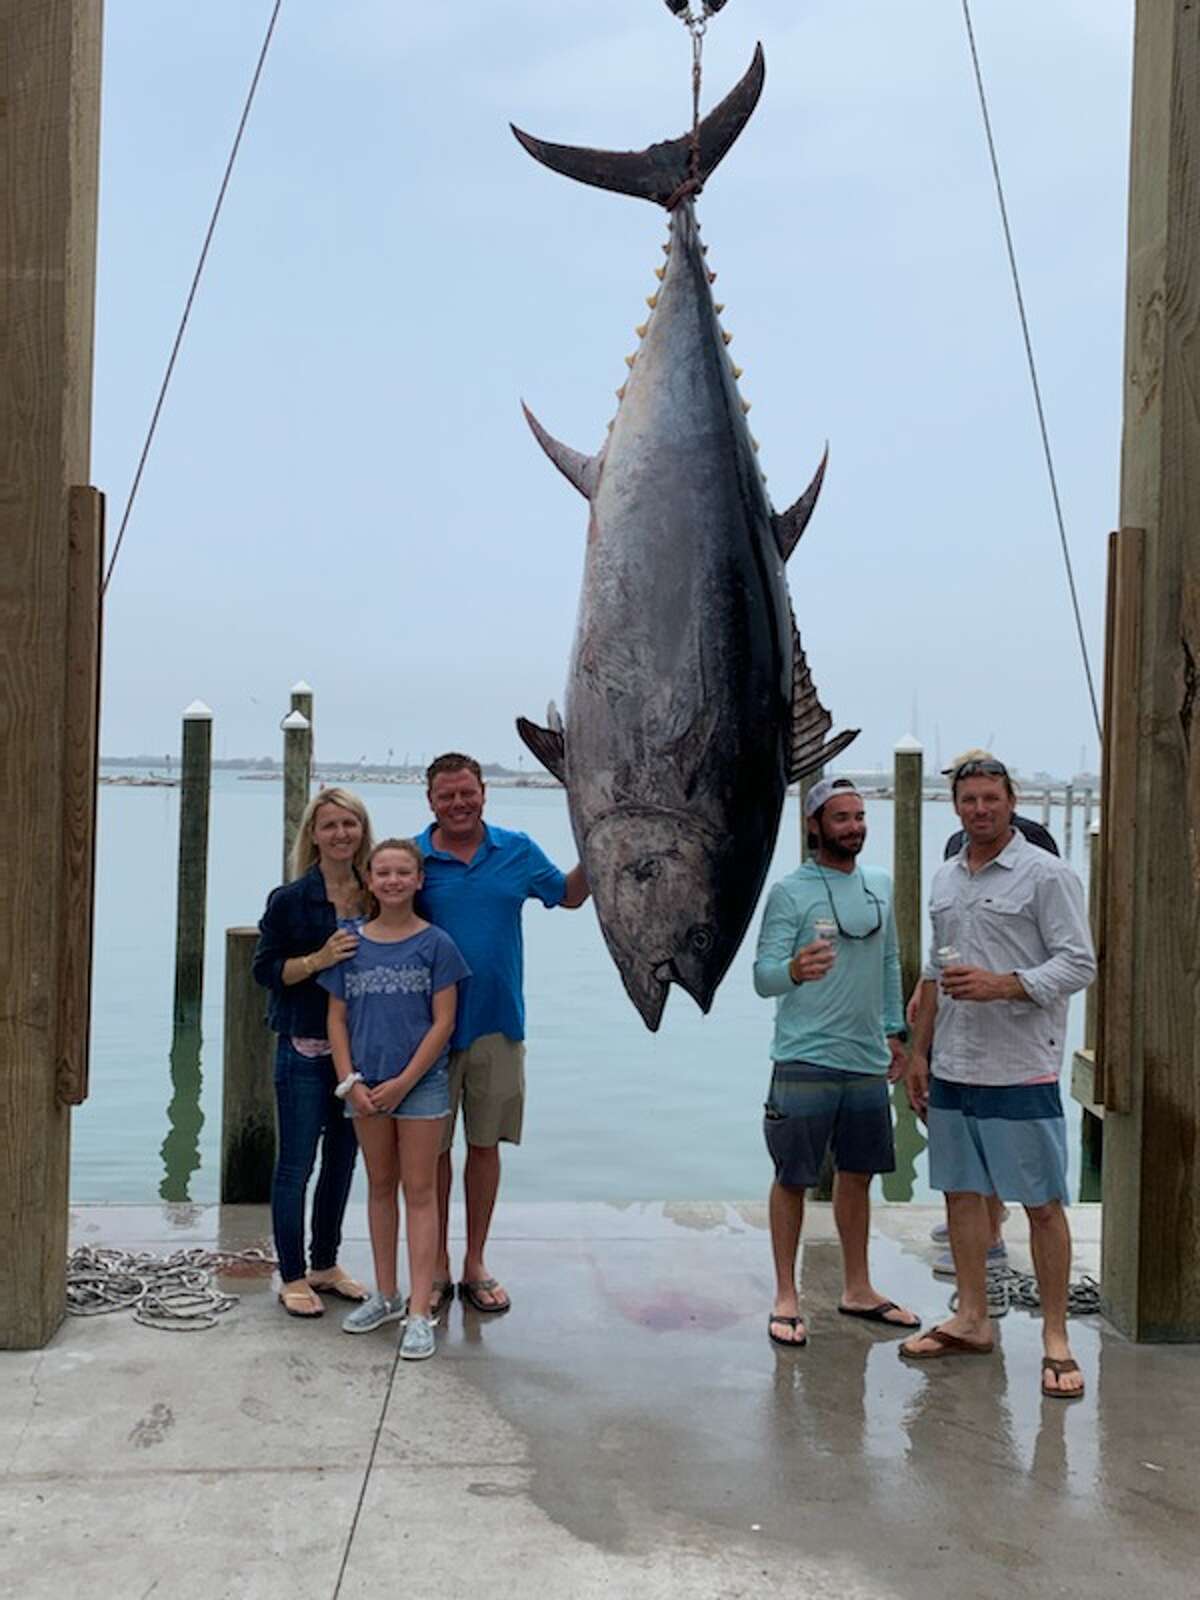 A photo of the Texas state record bluefin tuna caught in April.